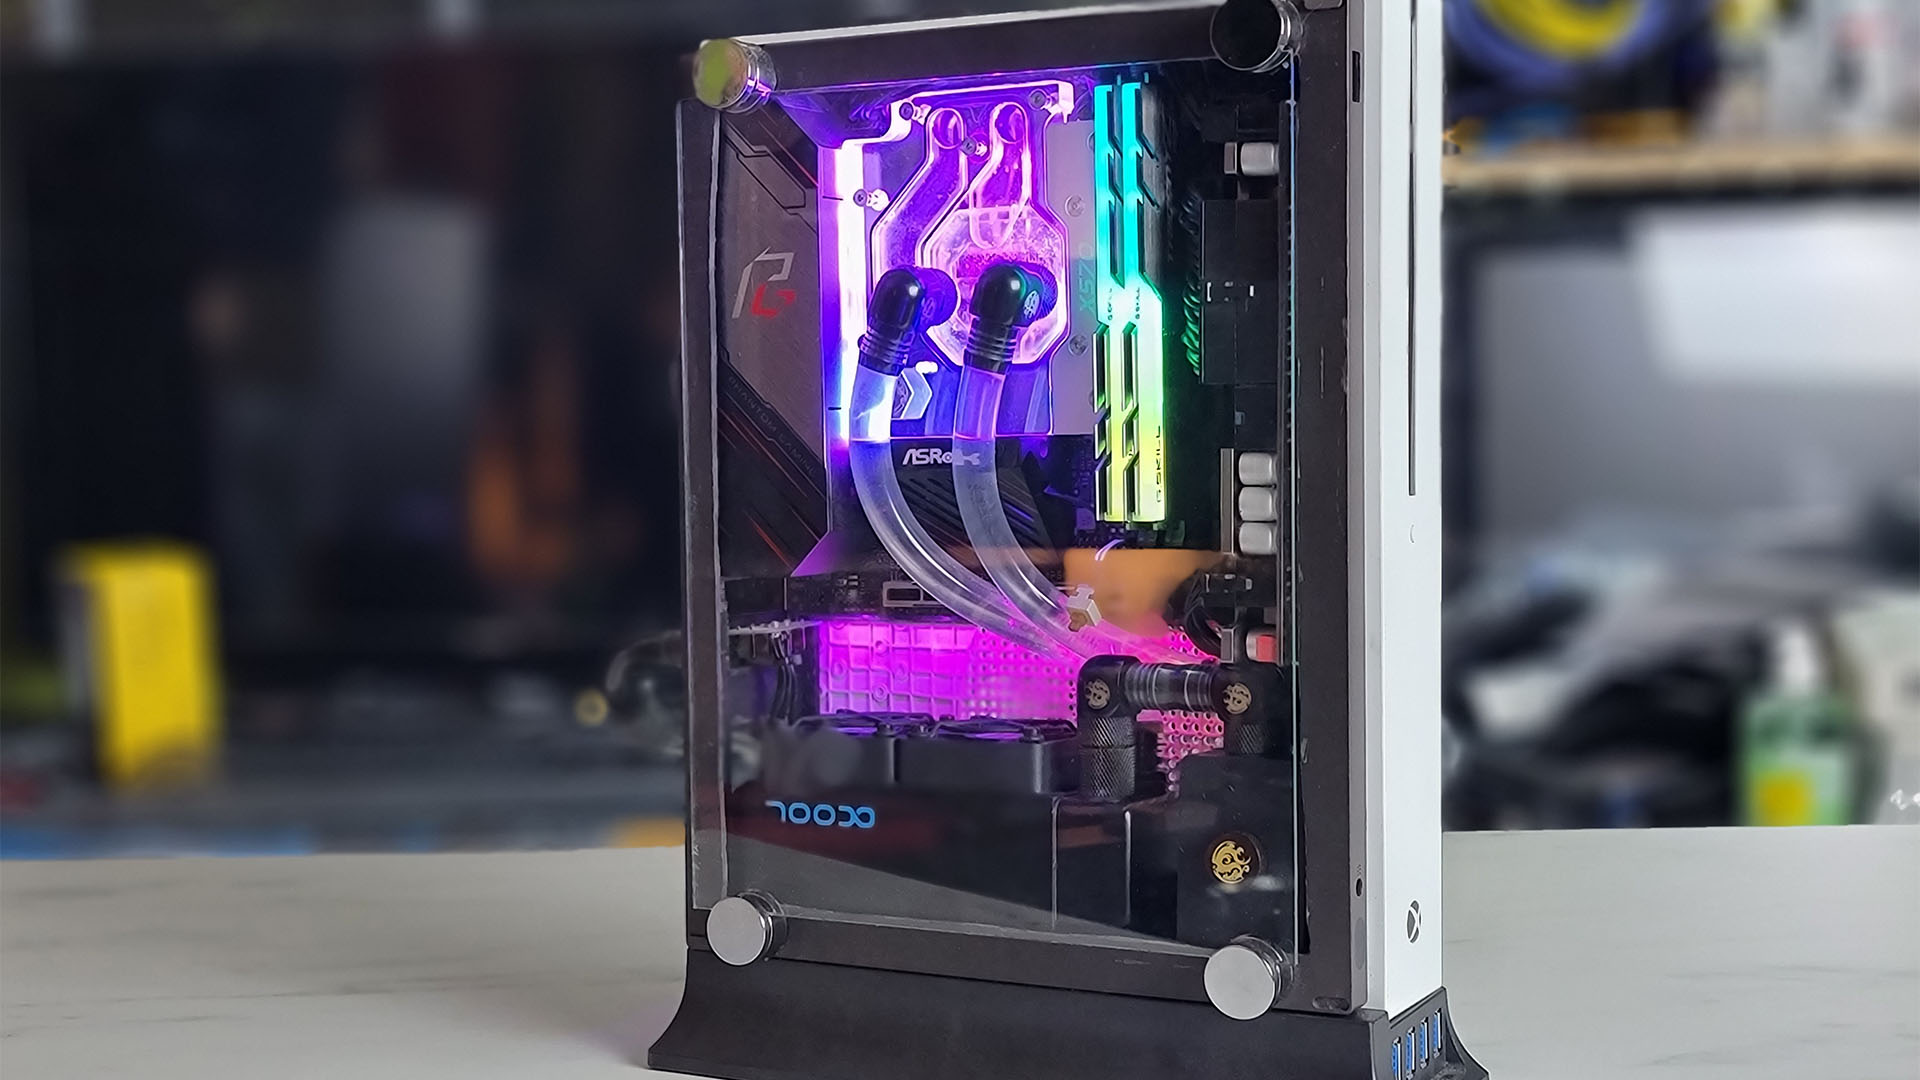 The inside of a Xbox One S PC with neon lights and water cooling